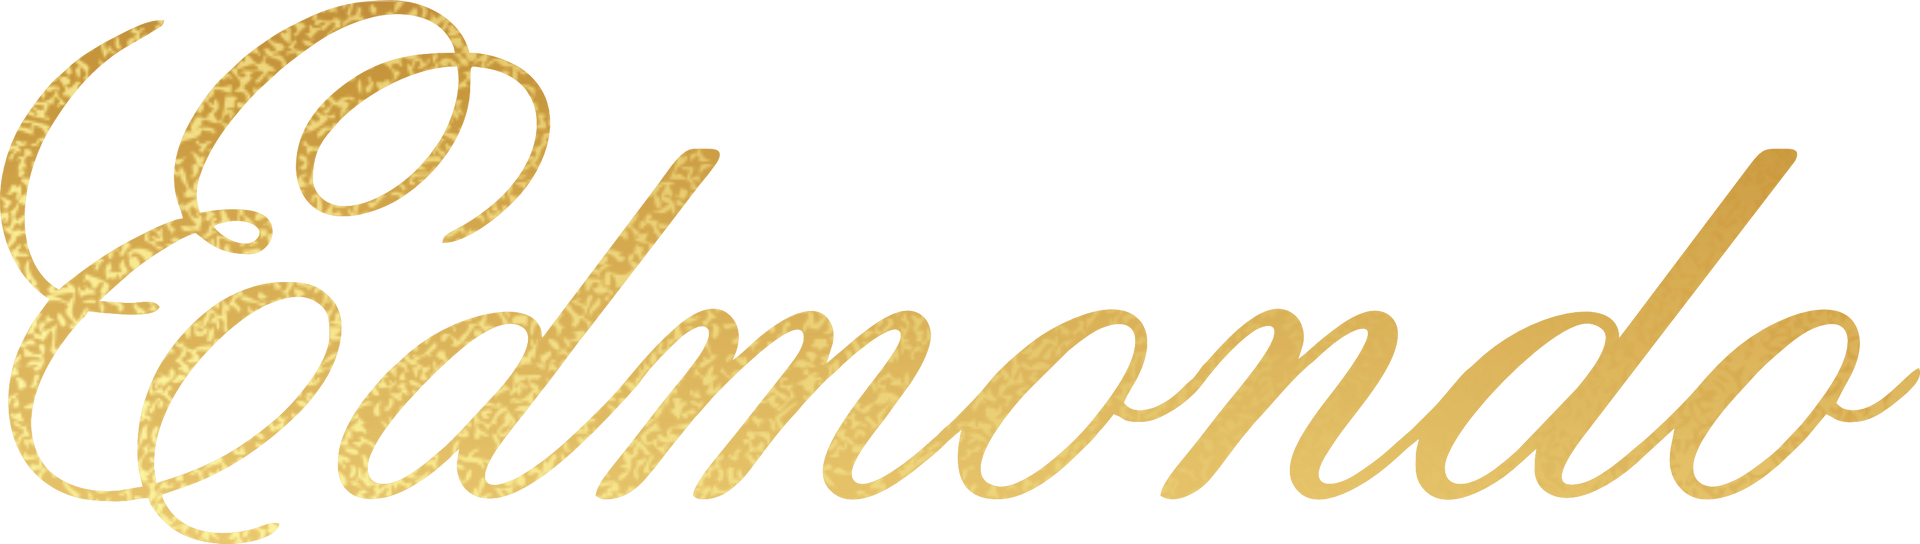 The word edmondo is written in gold on a white background.